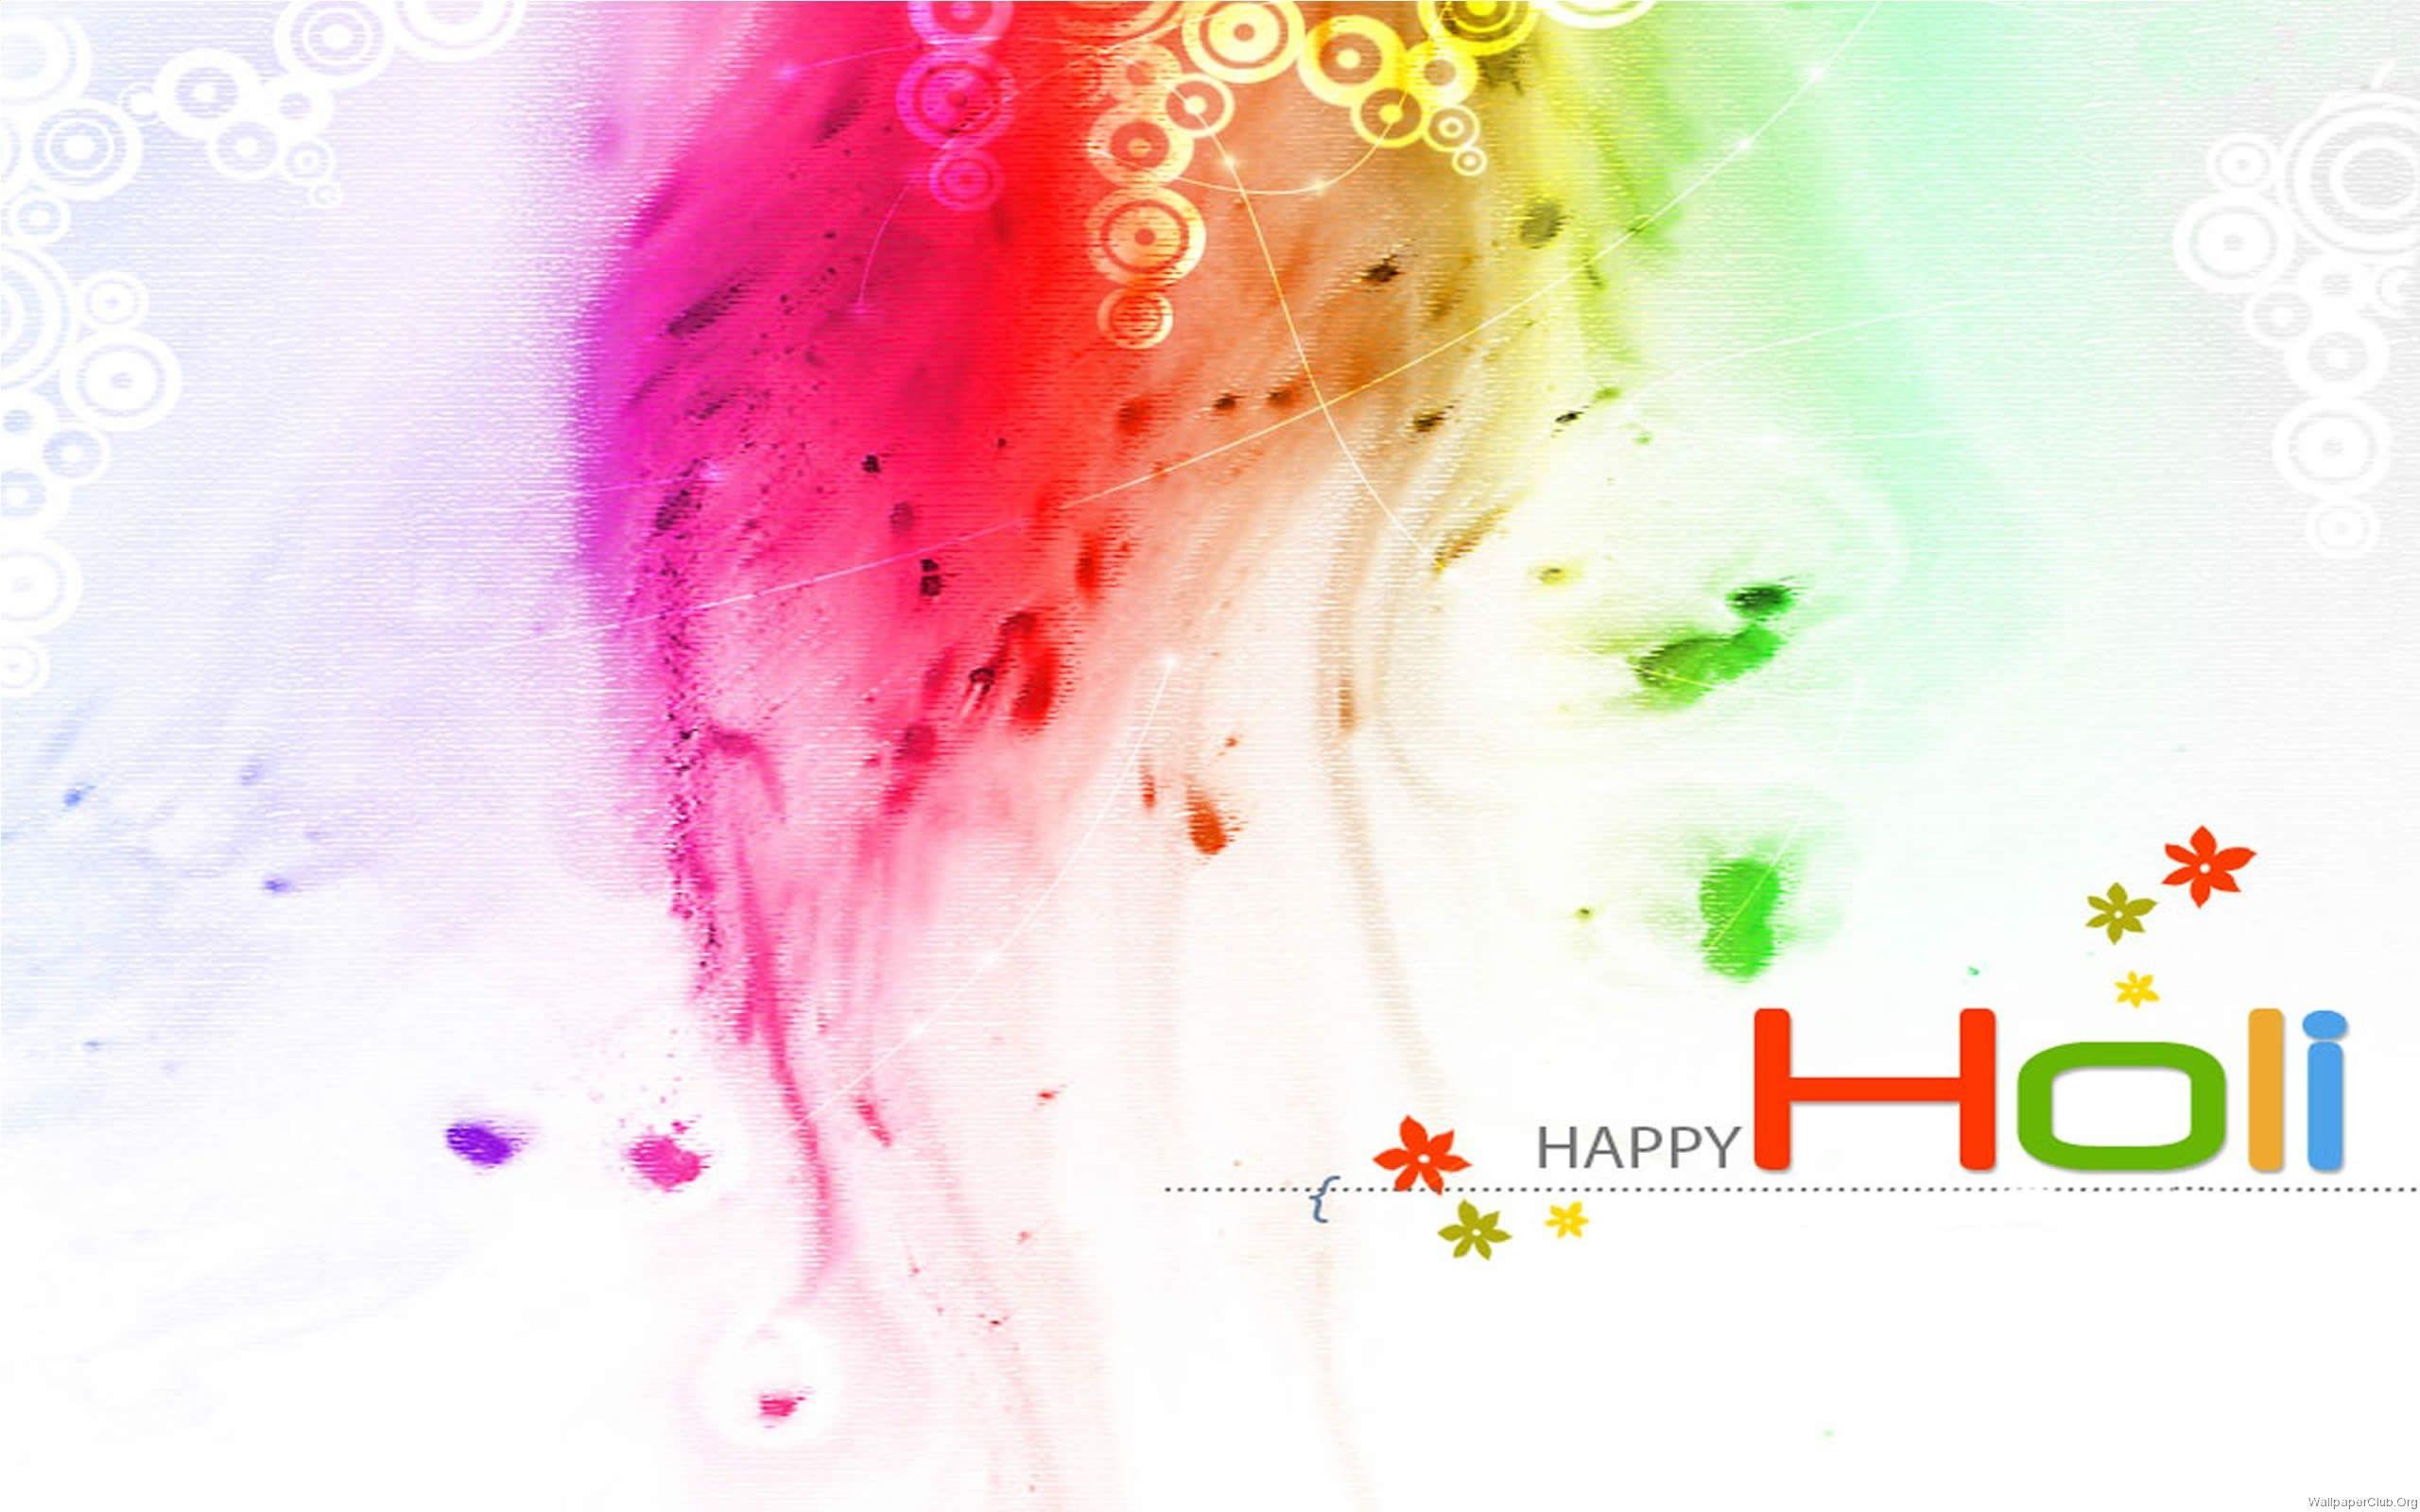 Happy Holi 2017 Wallpapers, Image Wishes Photos for HD, 4k, Wide